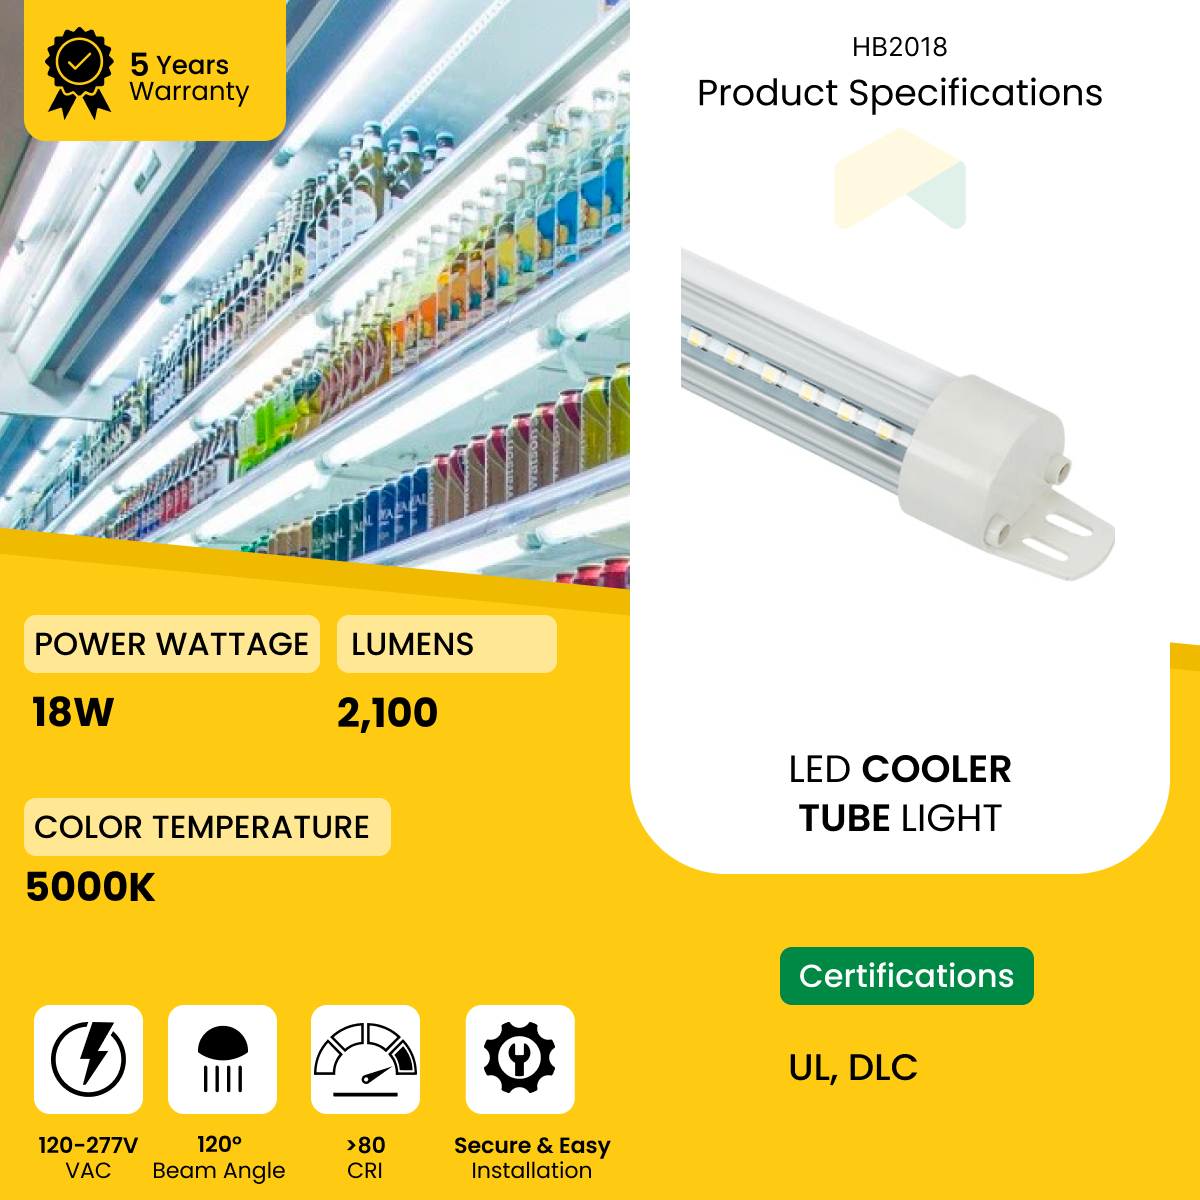 4ft T8 LED Cooler Tube/Refrigerator Light - 18W - 5000K, 2340Lumens, 100V-277V, UL Listed, Ideal for Display Cases, Refrigeration Units, Deli Cases, Convenience Stores - Case of 25 DLC Premium Listed - 5 Years Warranty